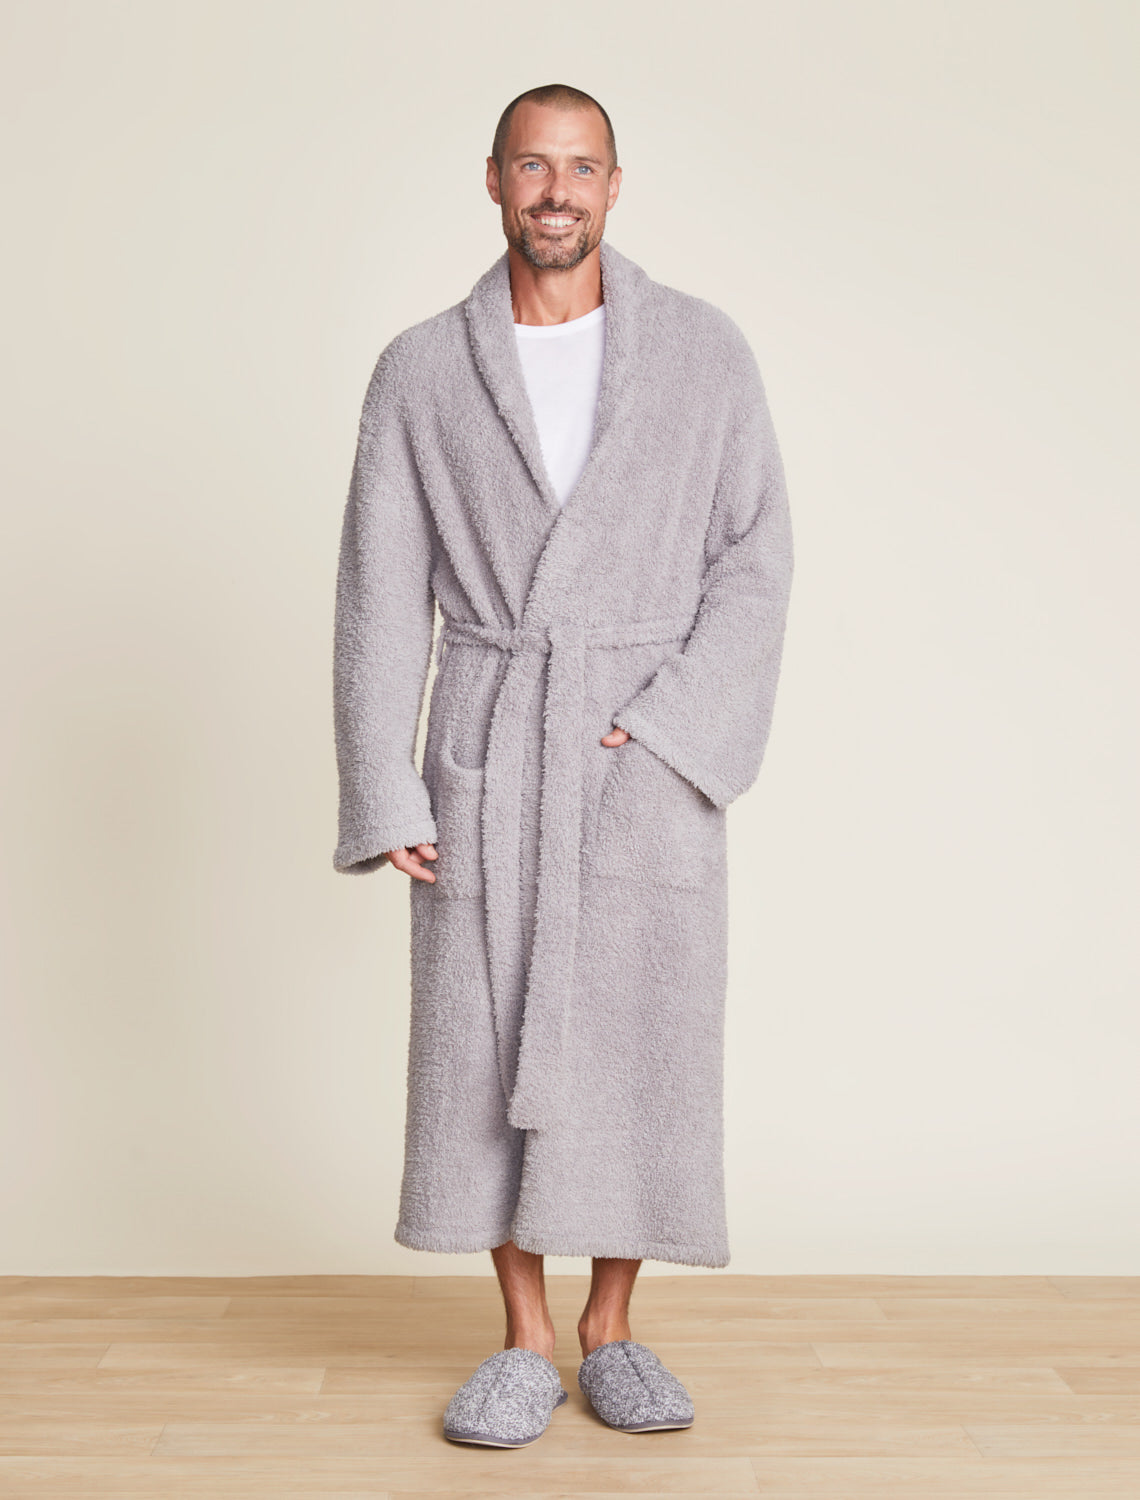 BAREFOOT DREAMS CozyChic Adult Robe